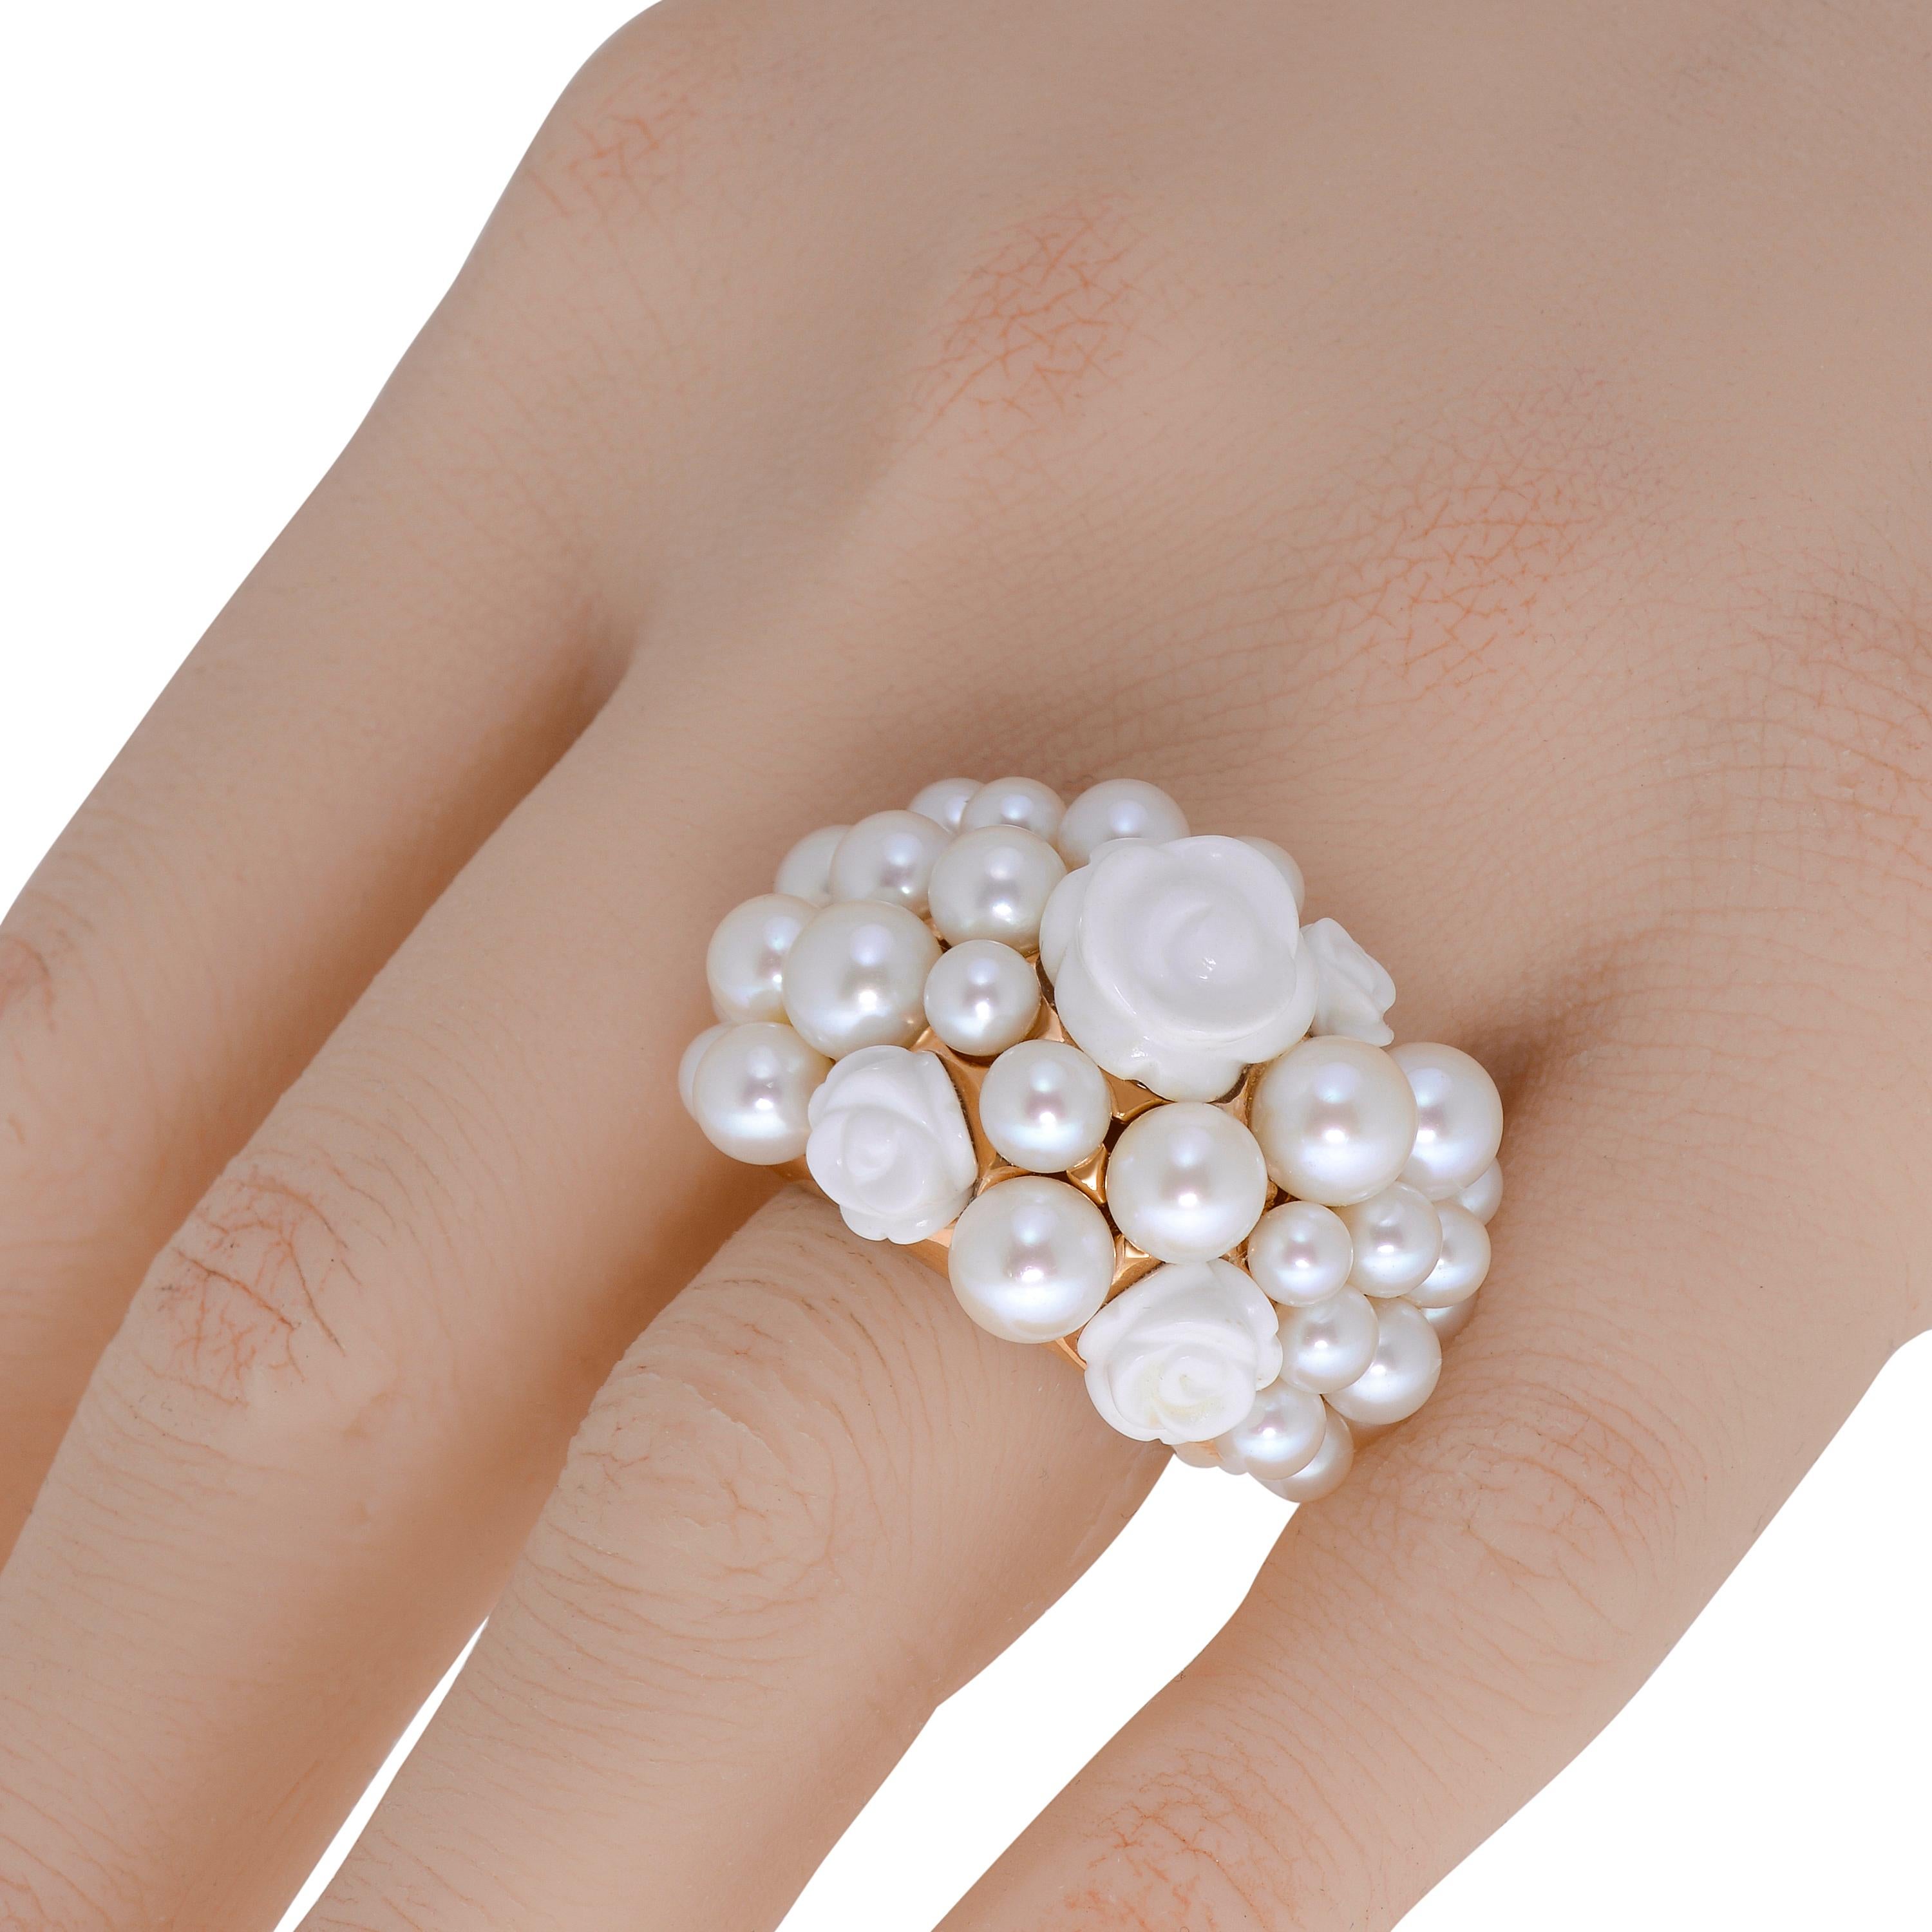 This ornate Mimi Milano 18K rose gold cocktail ring features 4-6mm cultured pearls elevated with 8.04ct. tw. White Agate roses. The ring size is 7.75. The band width is 6mm. The weight is 27g.
